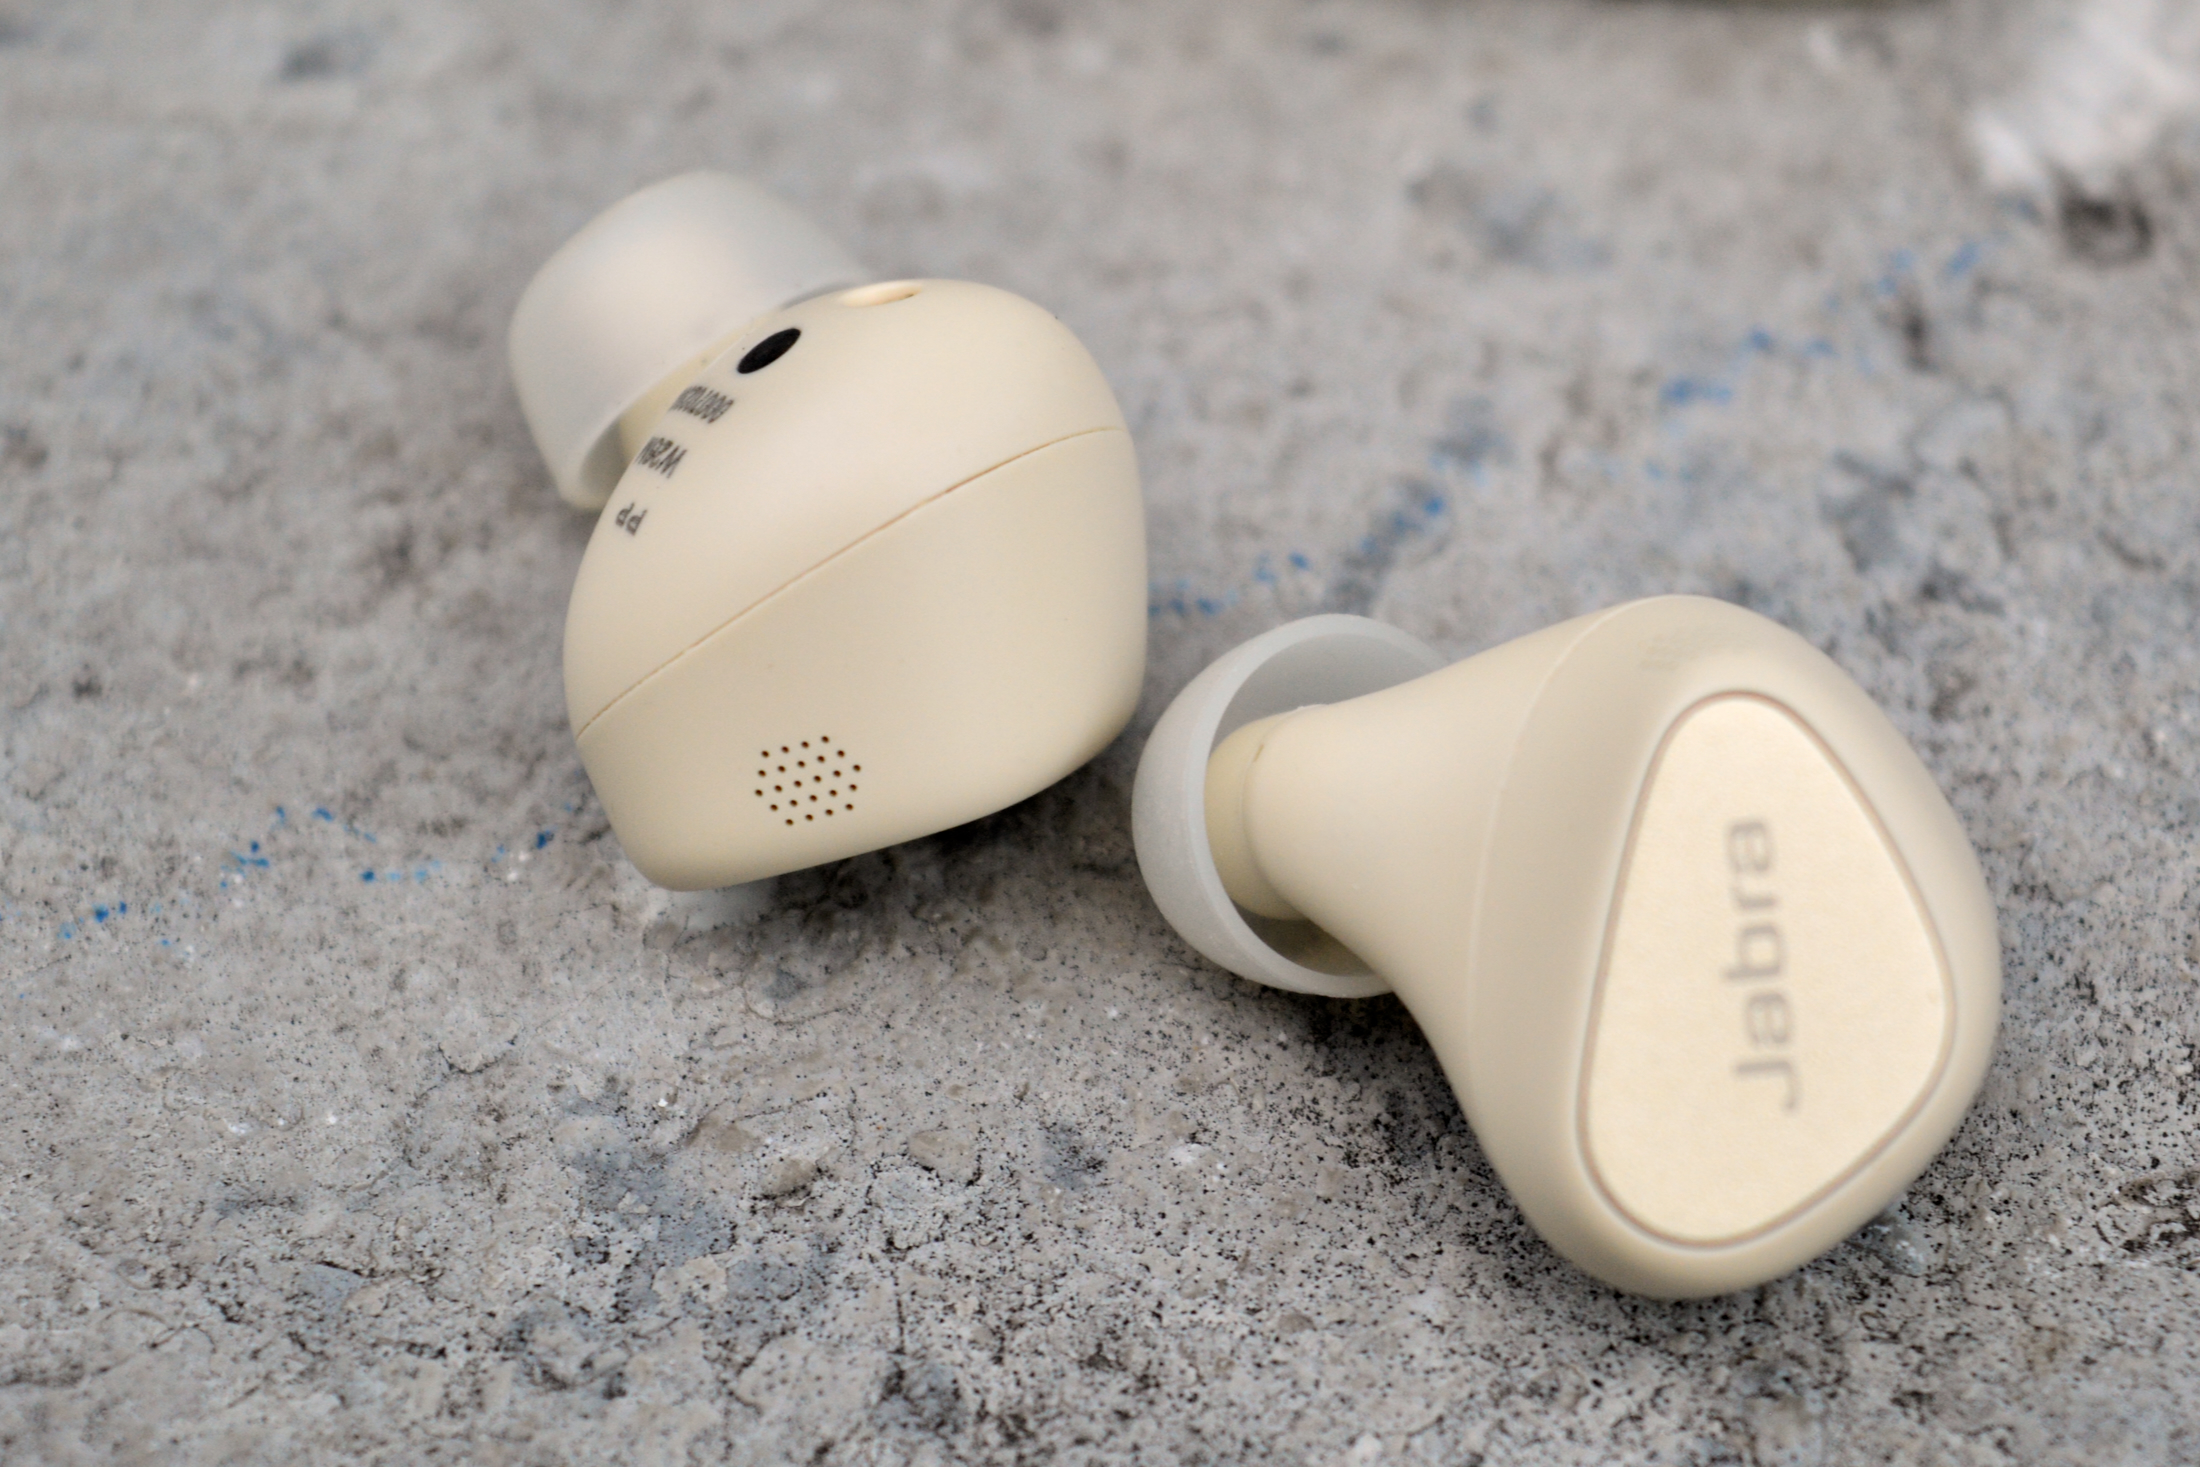 Jabra Elite 5 hands-on: The hybrid ANC of these headphones is just great